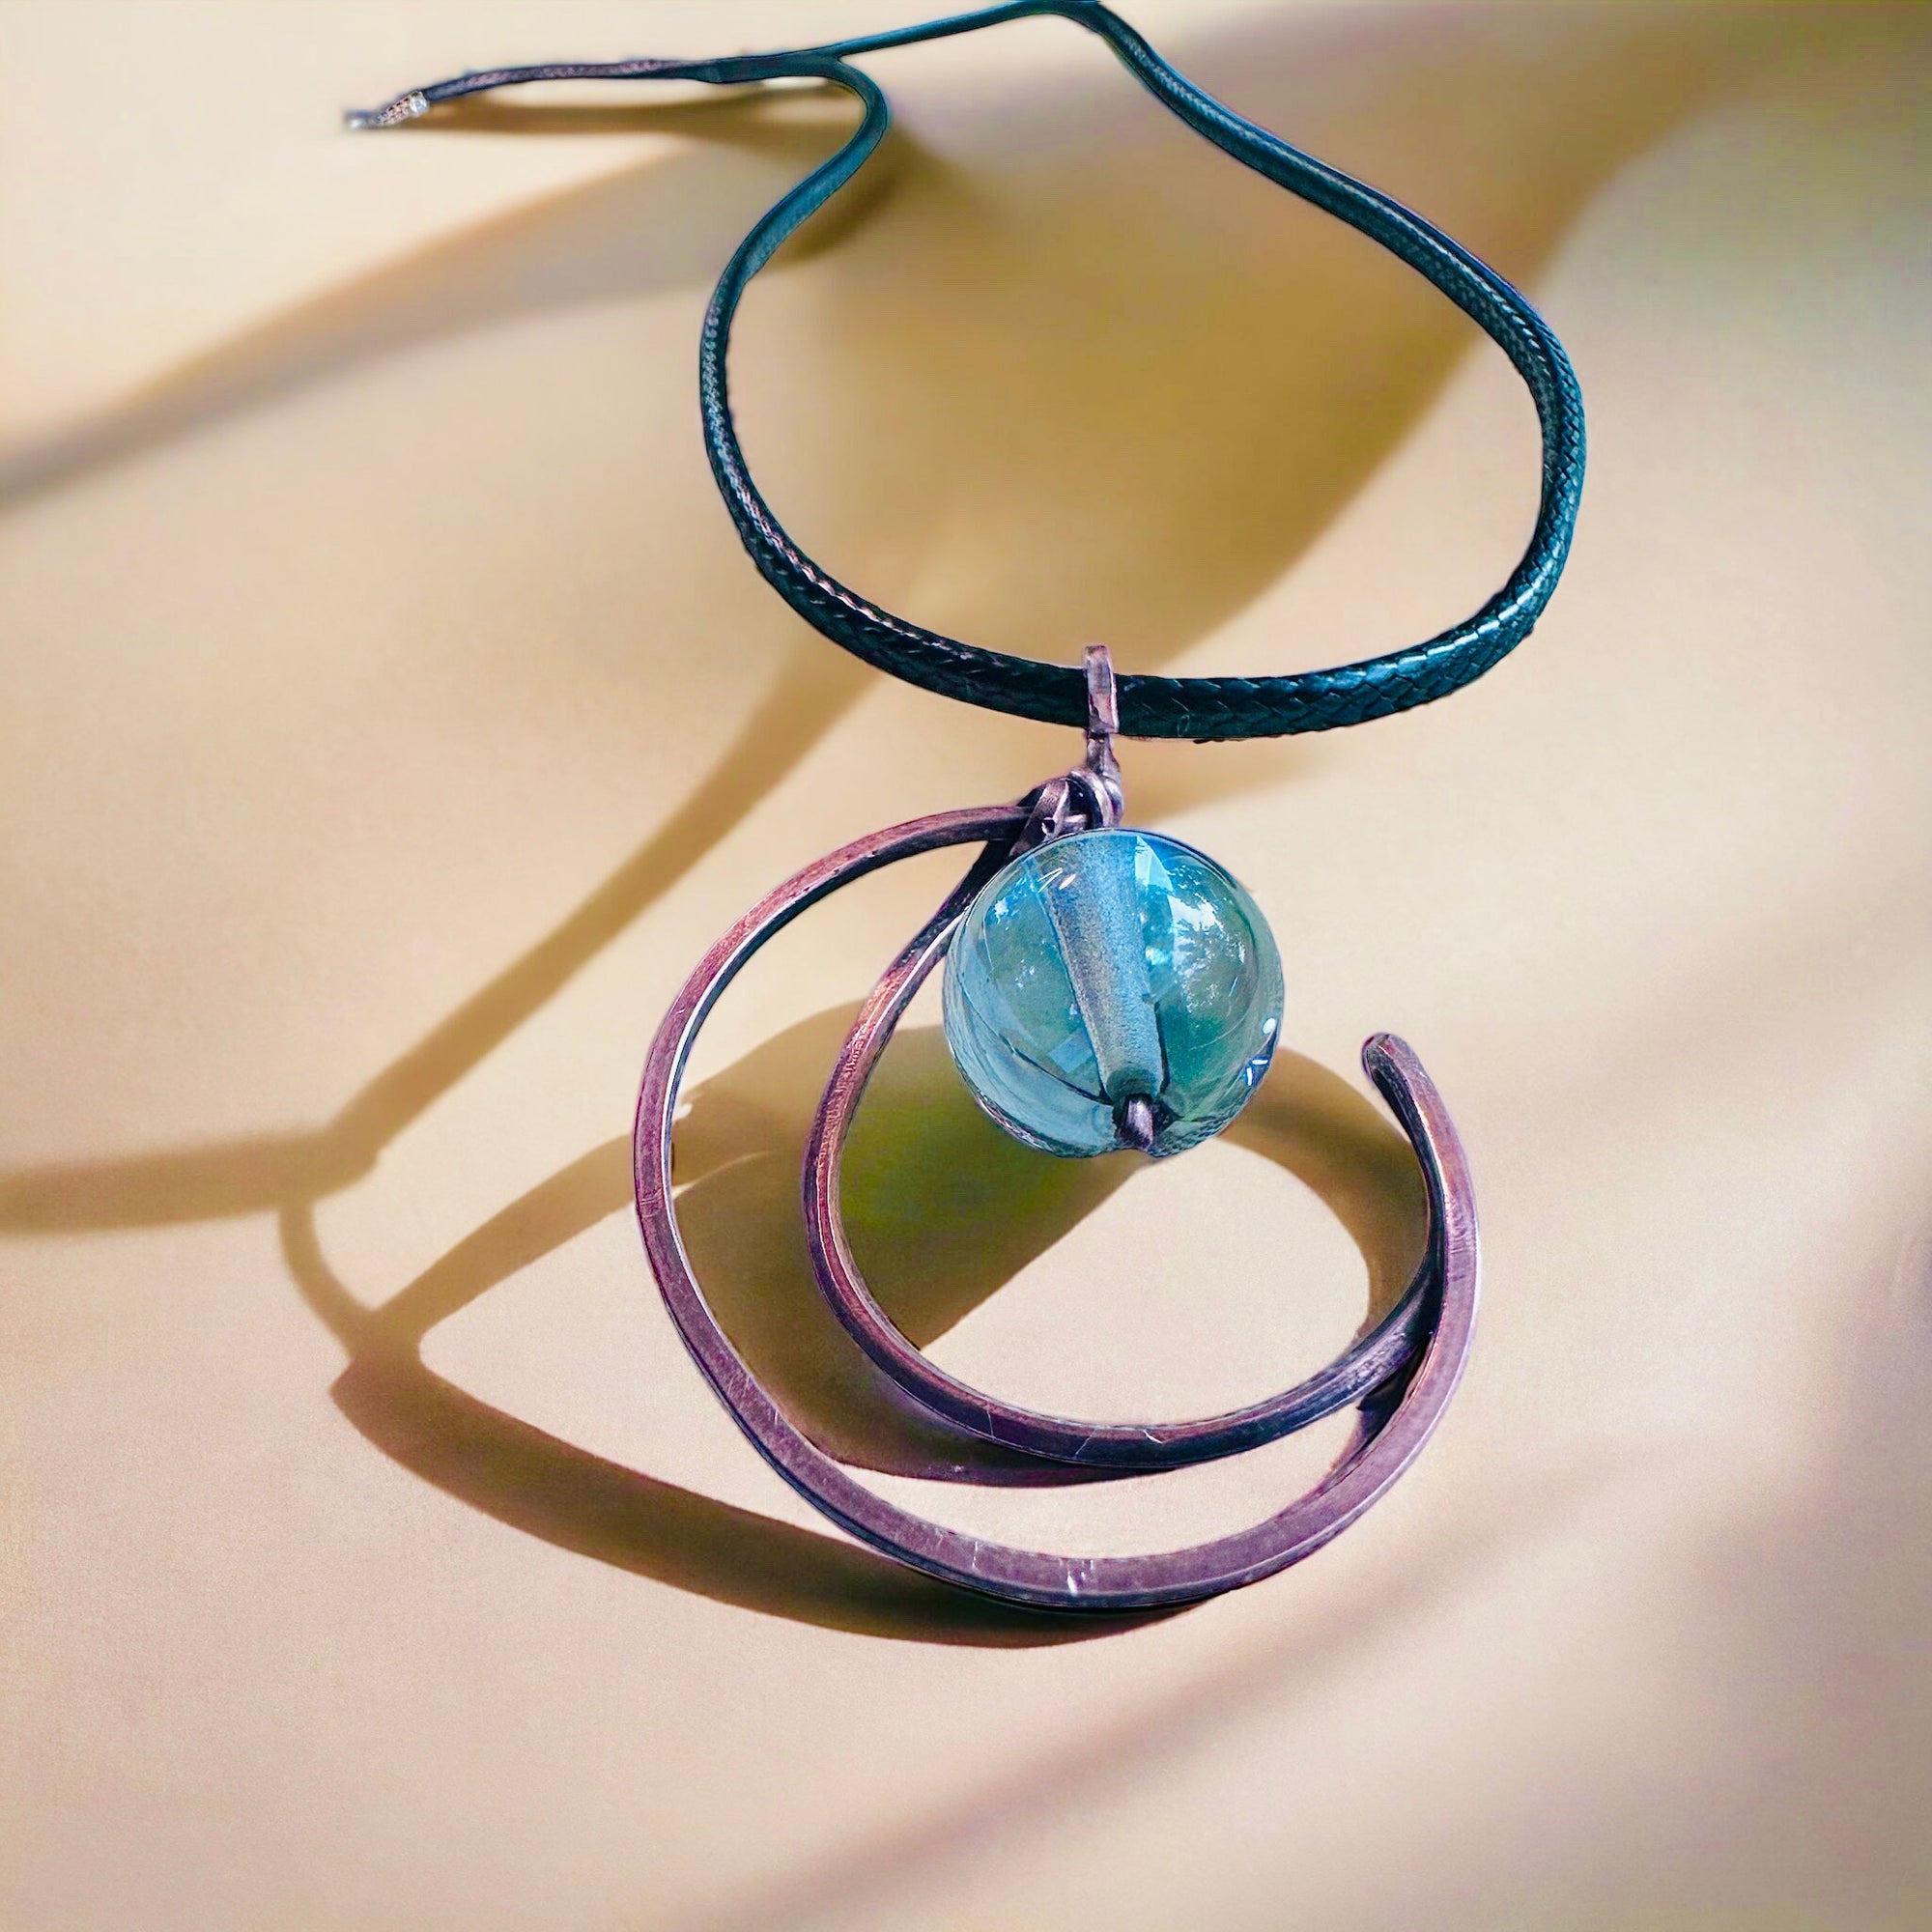 Twins in the Night necklace earth and moon pendant for women - Bespoke Jewelry (Copy)